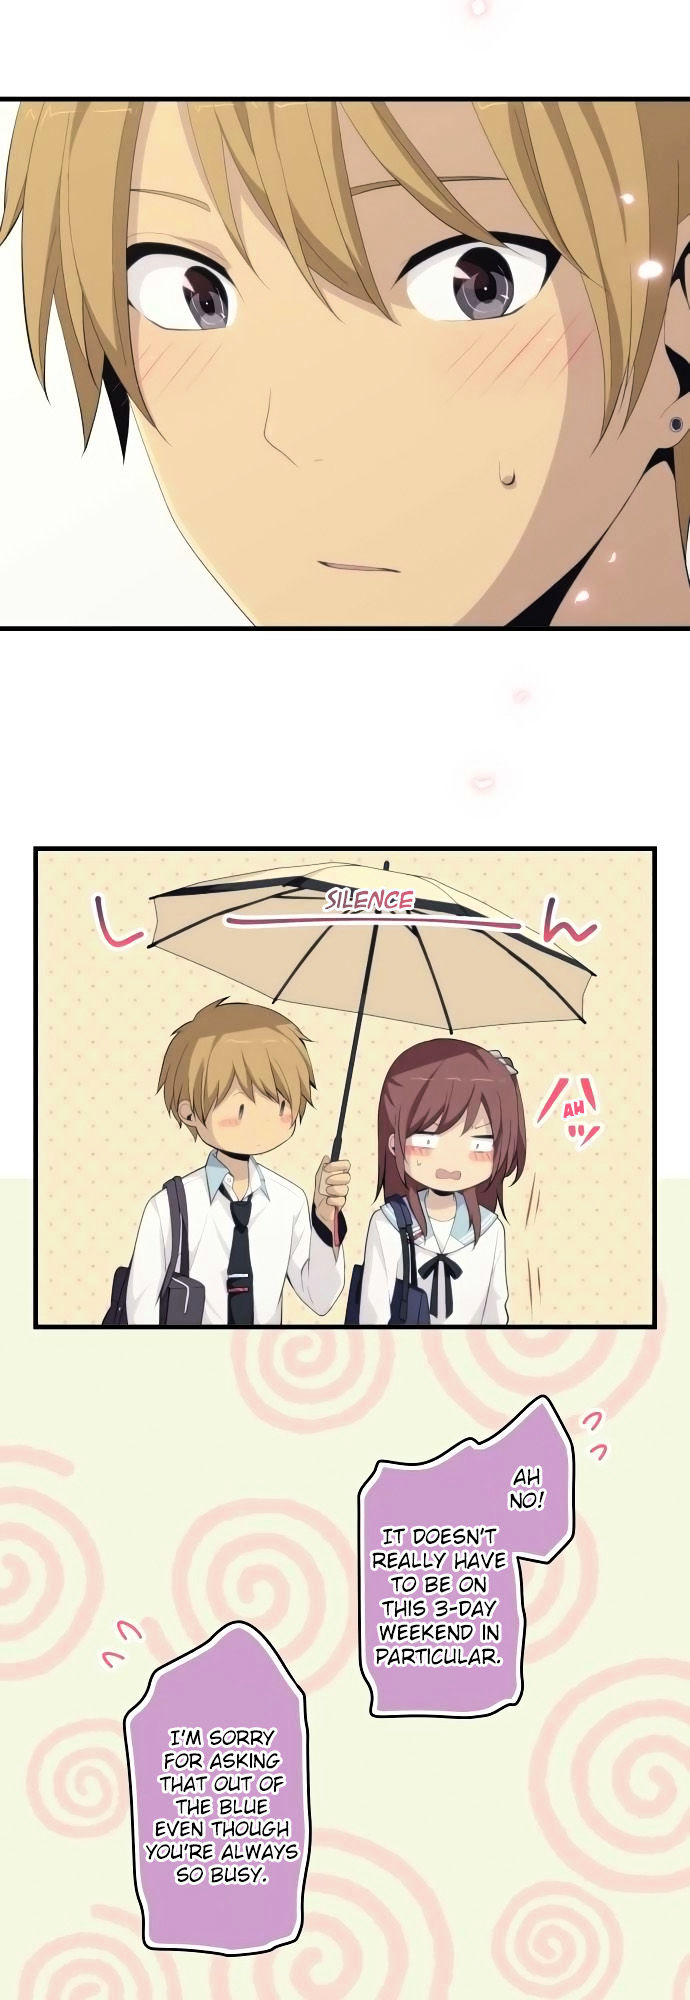 Relife 164 17